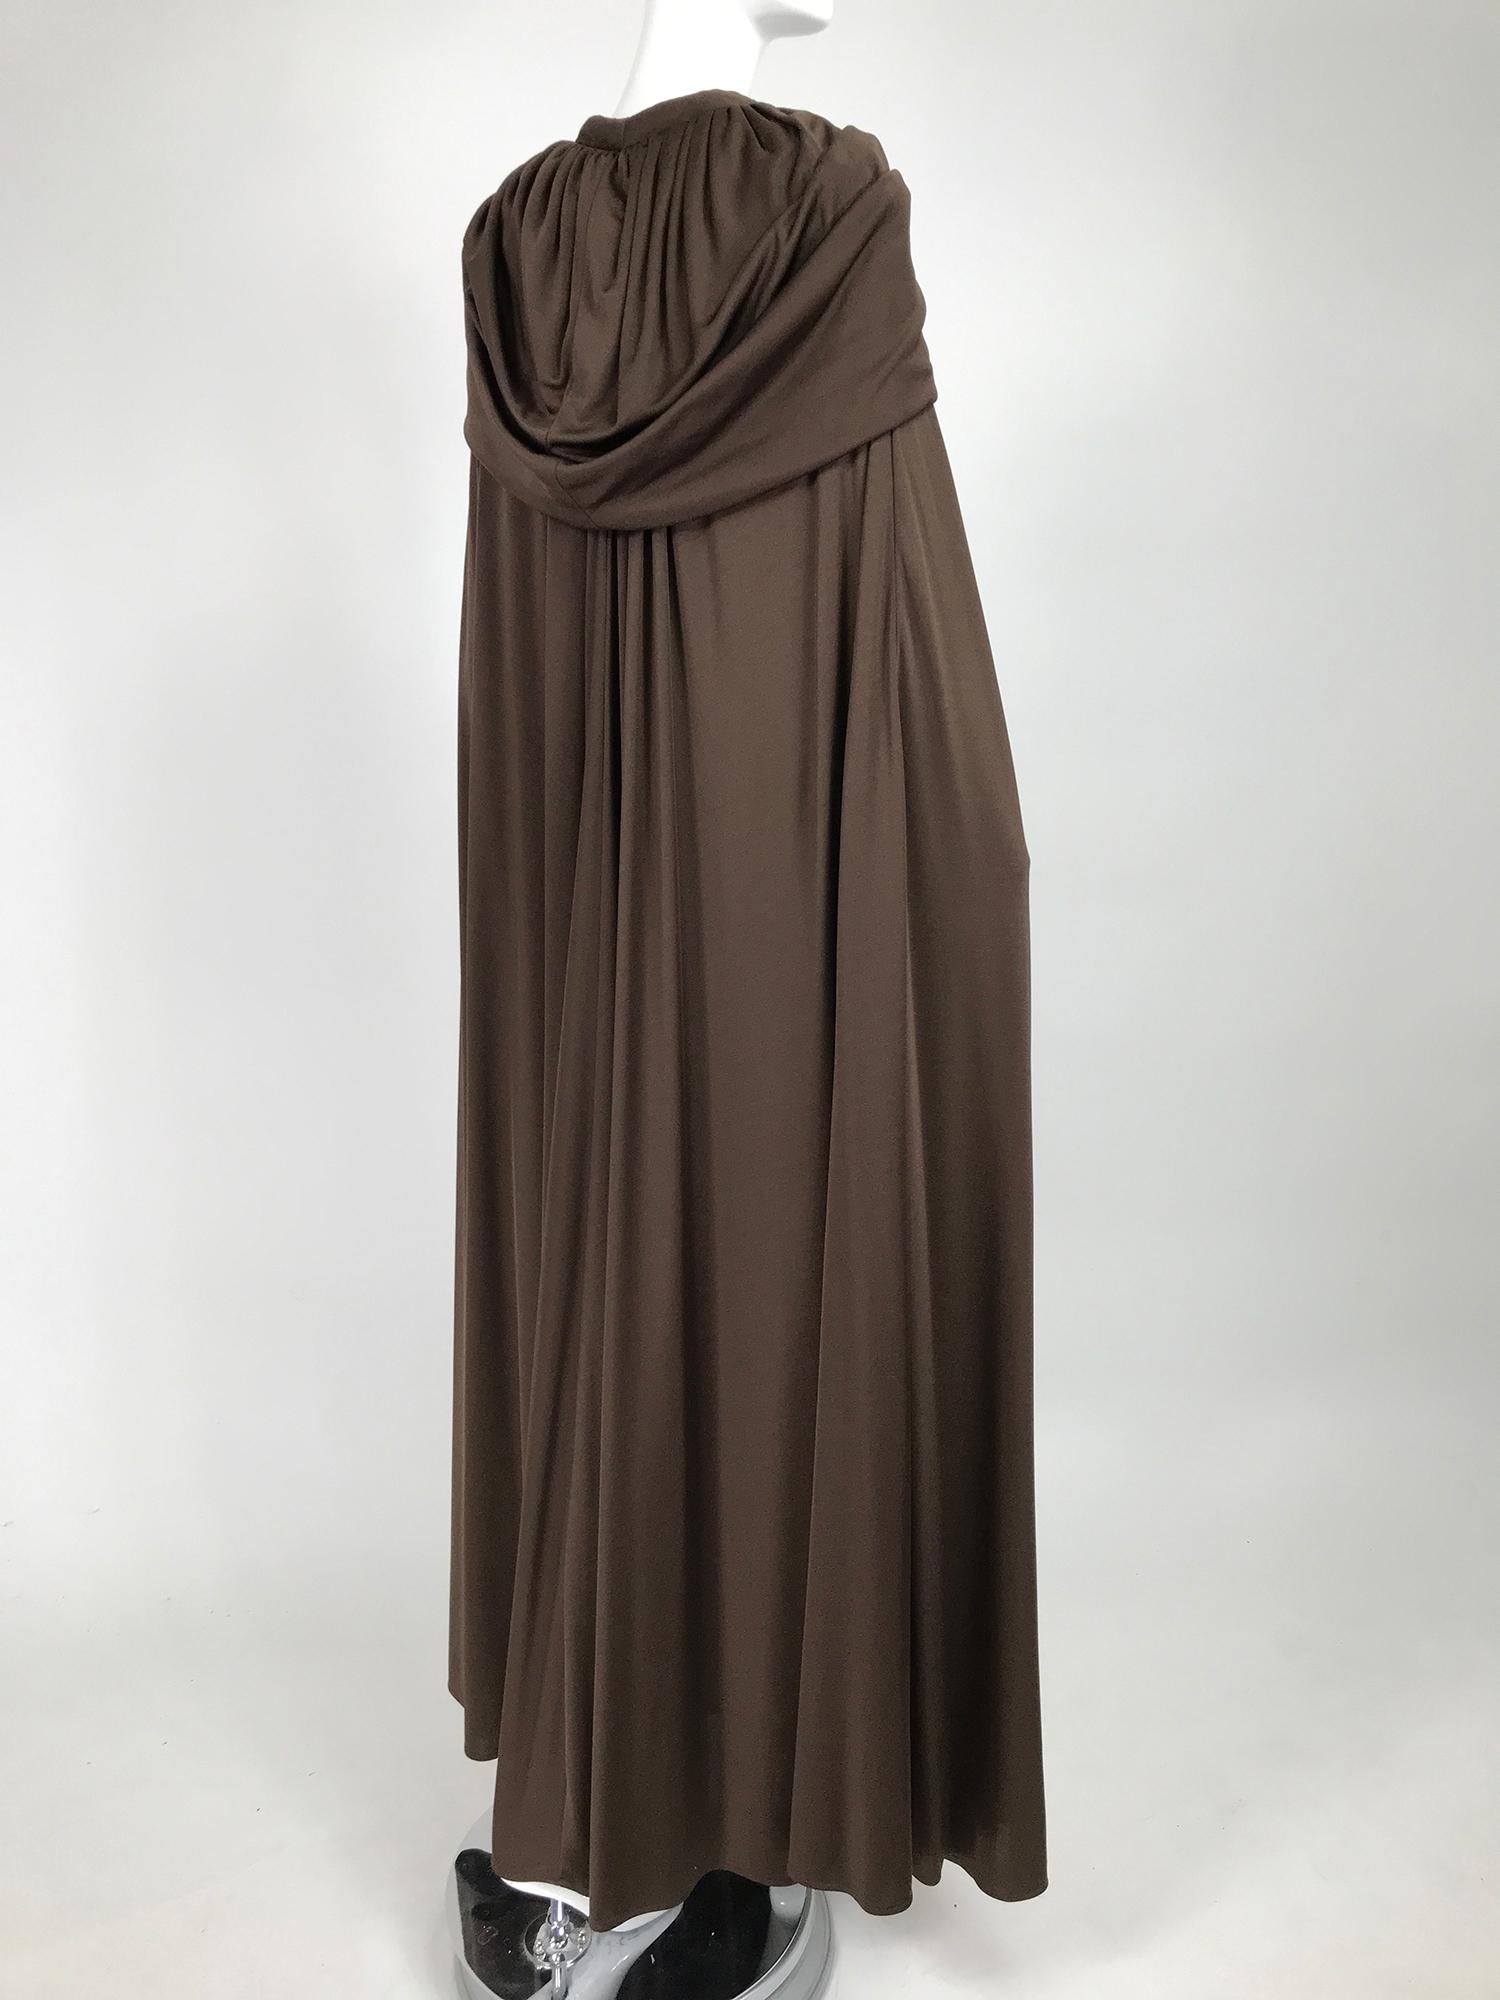 Women's Loris Azzaro Couture Chocolate Brown Silky Jersey Full Length Hooded Cape 1970s For Sale